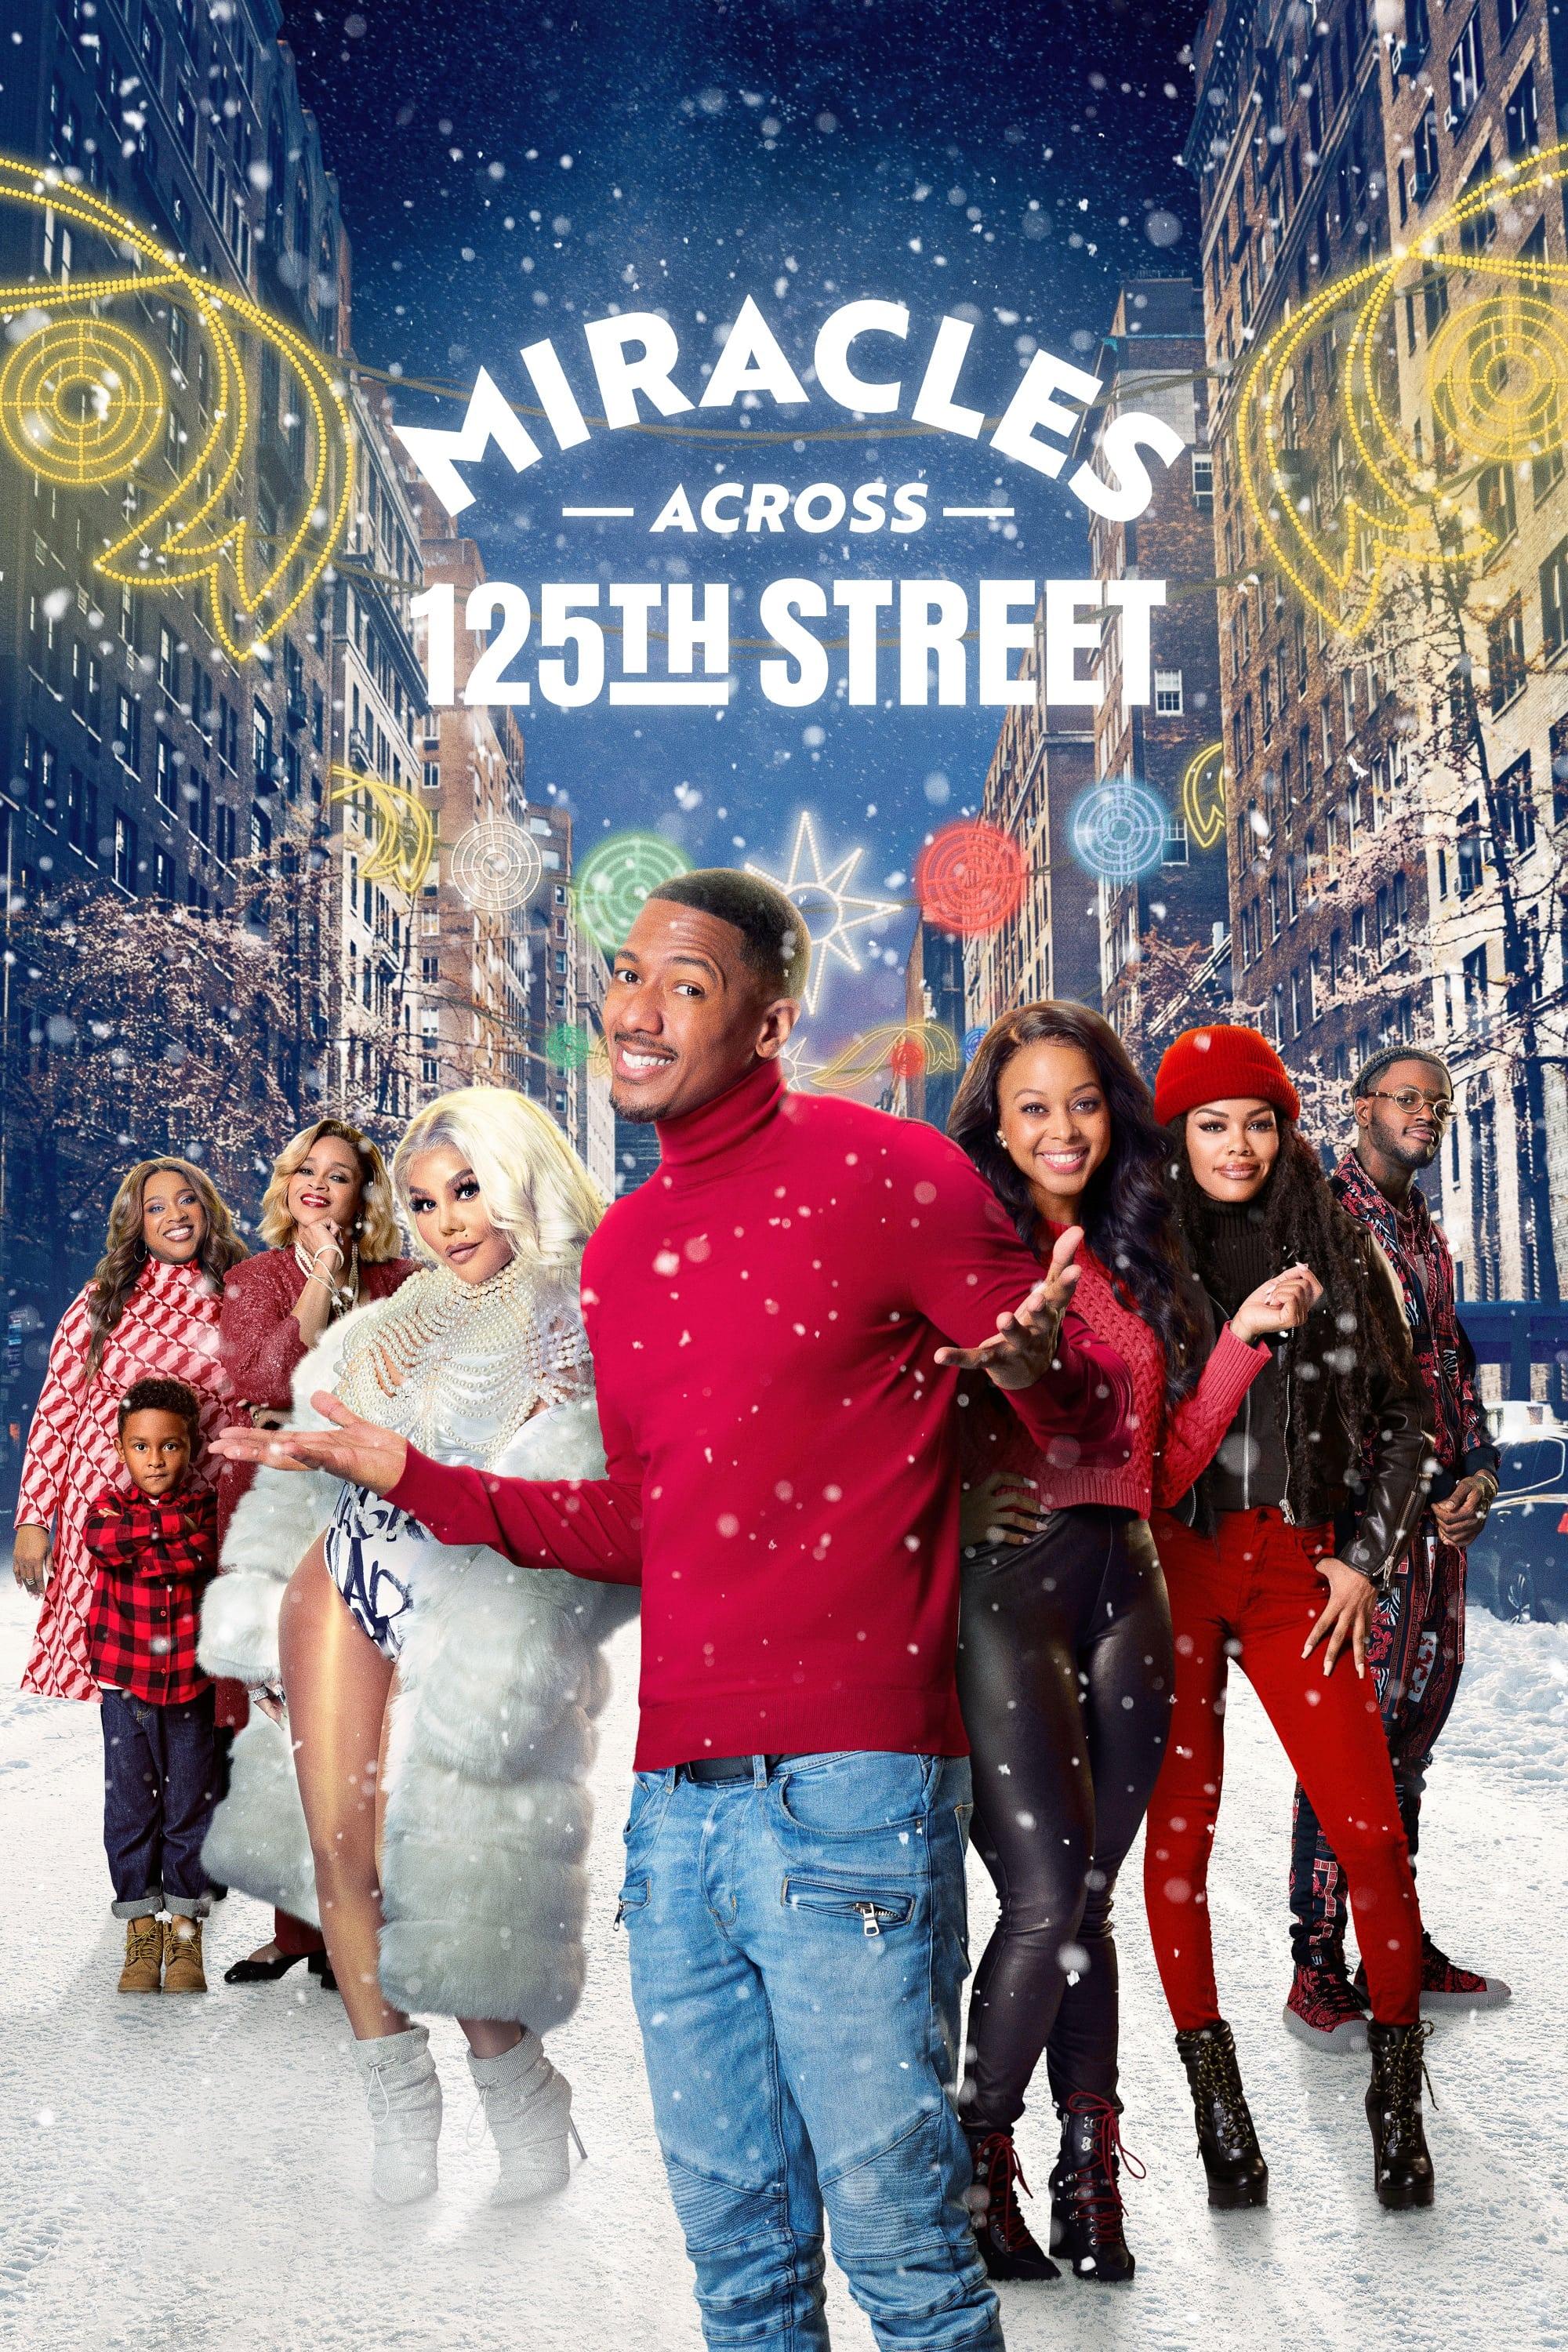 Miracles Across 125th Street poster